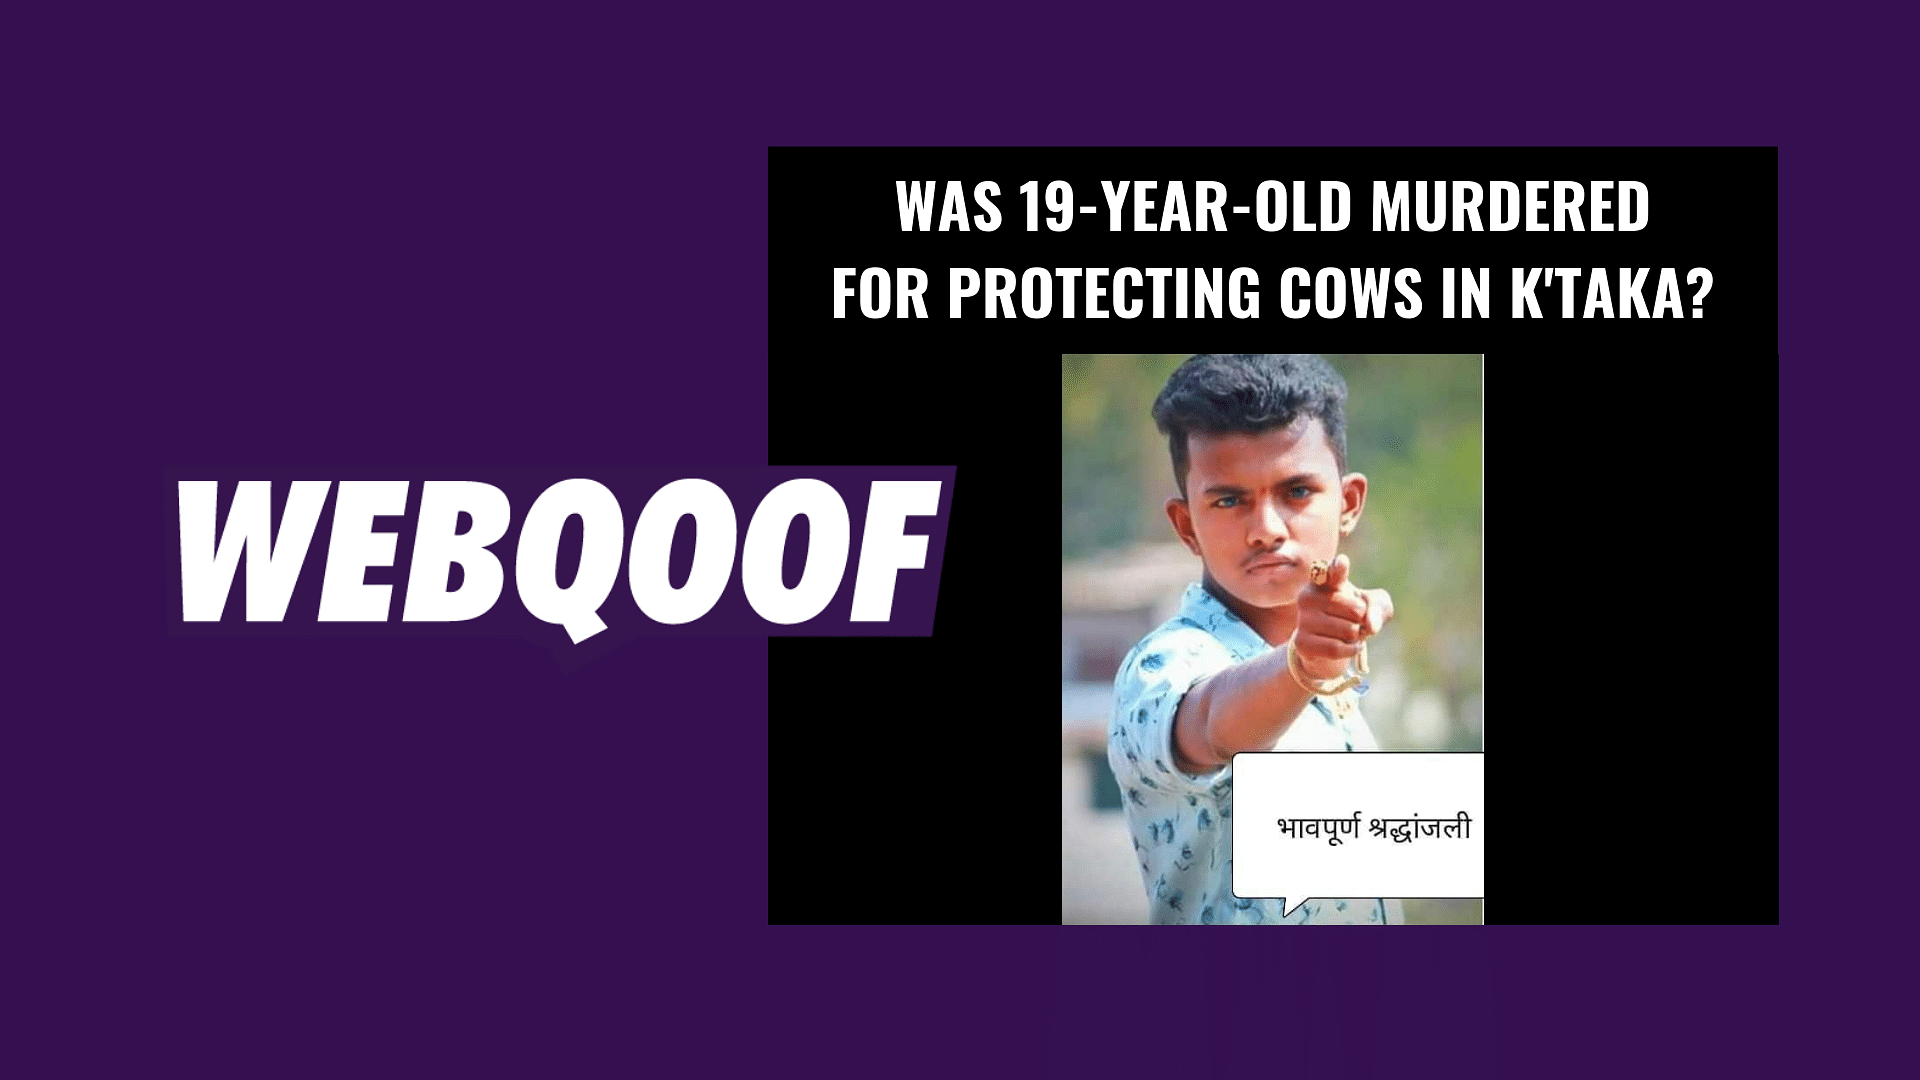 A viral message on social media falsely claimed that a 19-year-old boy was murdered in Belagavi, Karnataka for protecting cows from cow smugglers.